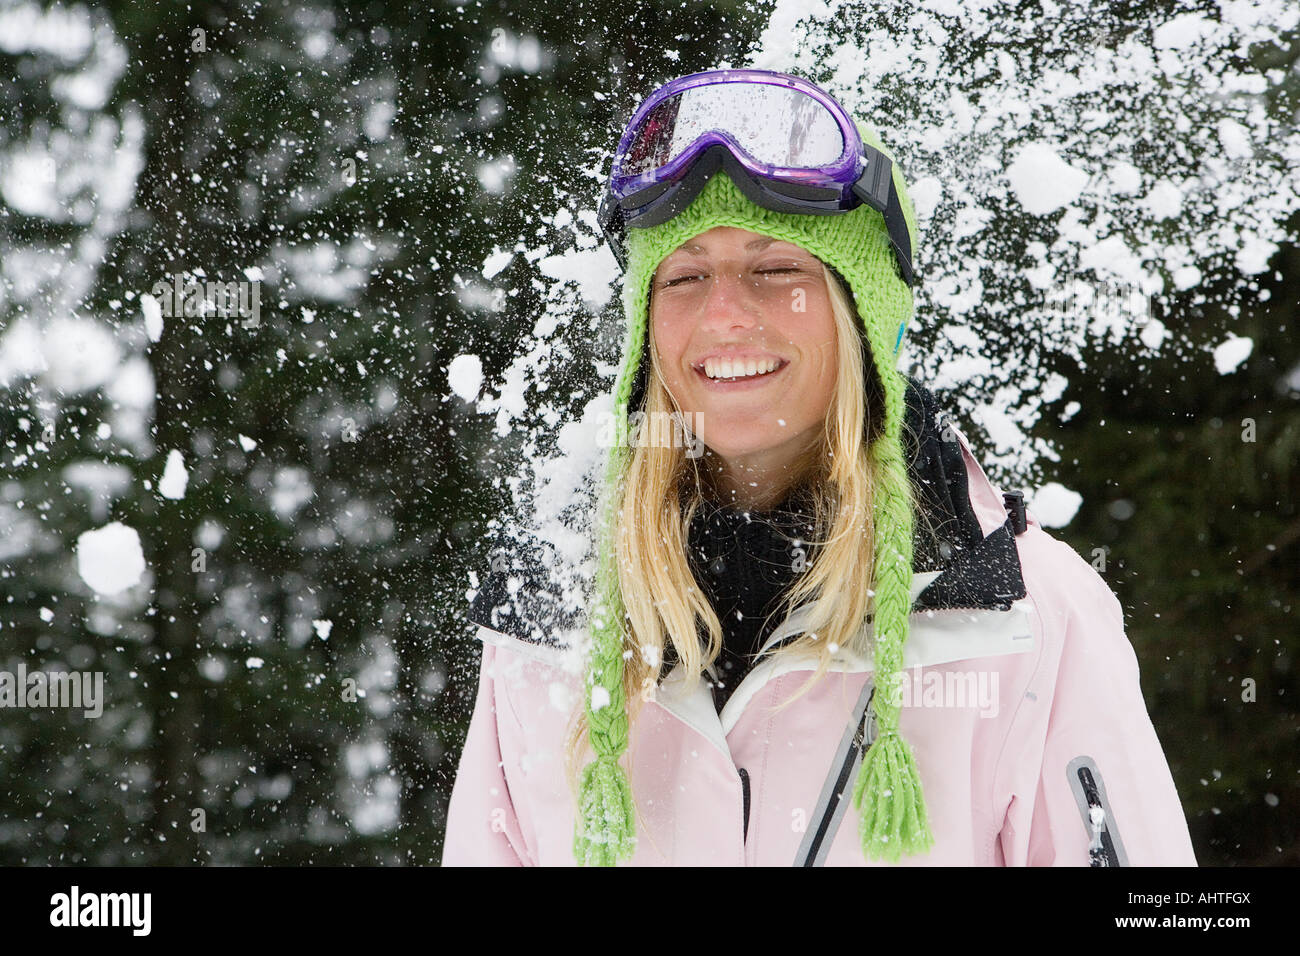 Snowball exploding on young blonde woman wearing ski-wear in forest Stock Photo